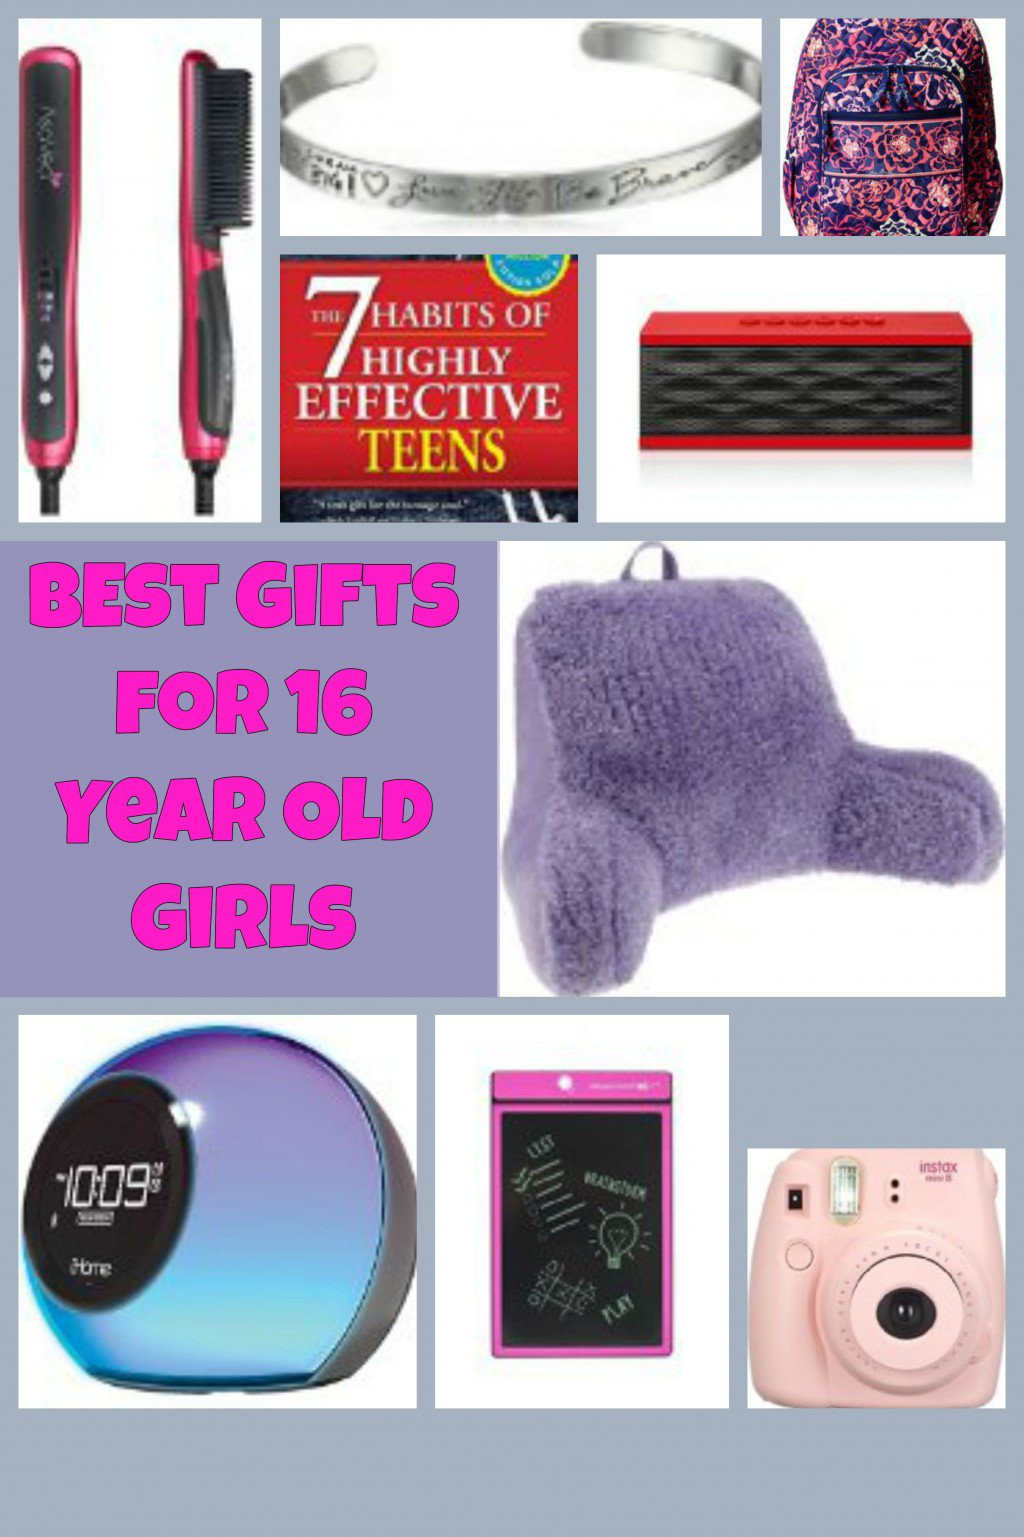 Birthday Gifts For A 16 Year Girl
 Best Gifts for 16 Year Old Girls Christmas and Birthday